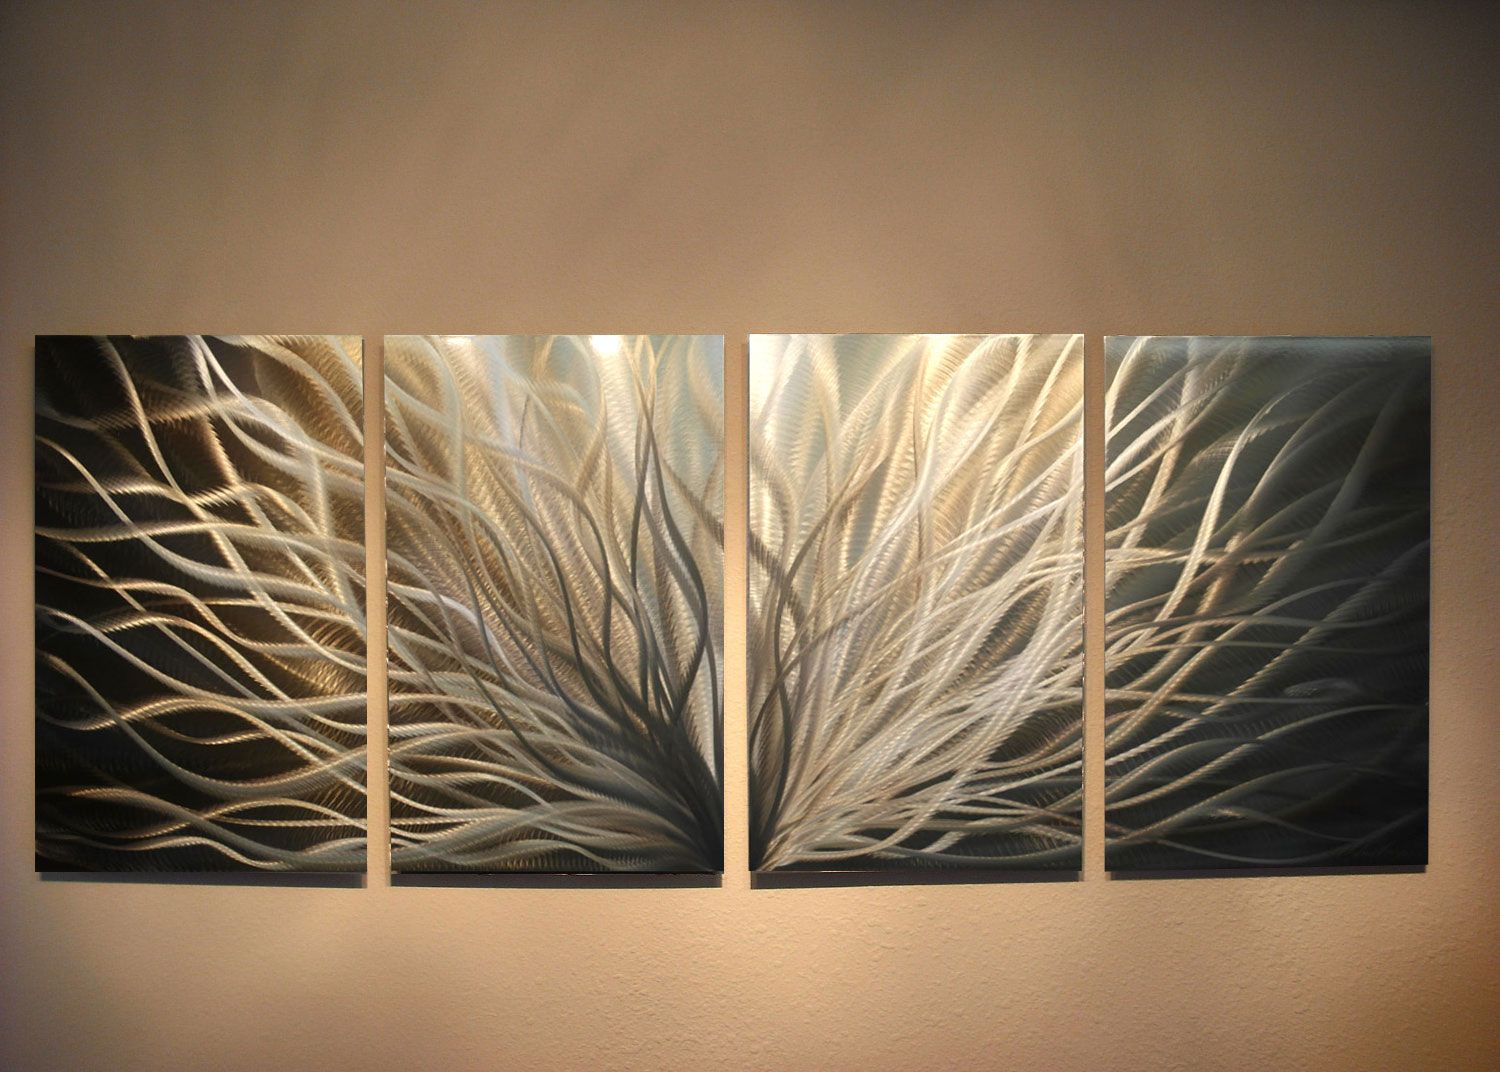 Abstract Metal Wall Art  Radiance Gold Silver  Contemporary Modern In Newest Metallic Swirl Wall Art (View 9 of 20)